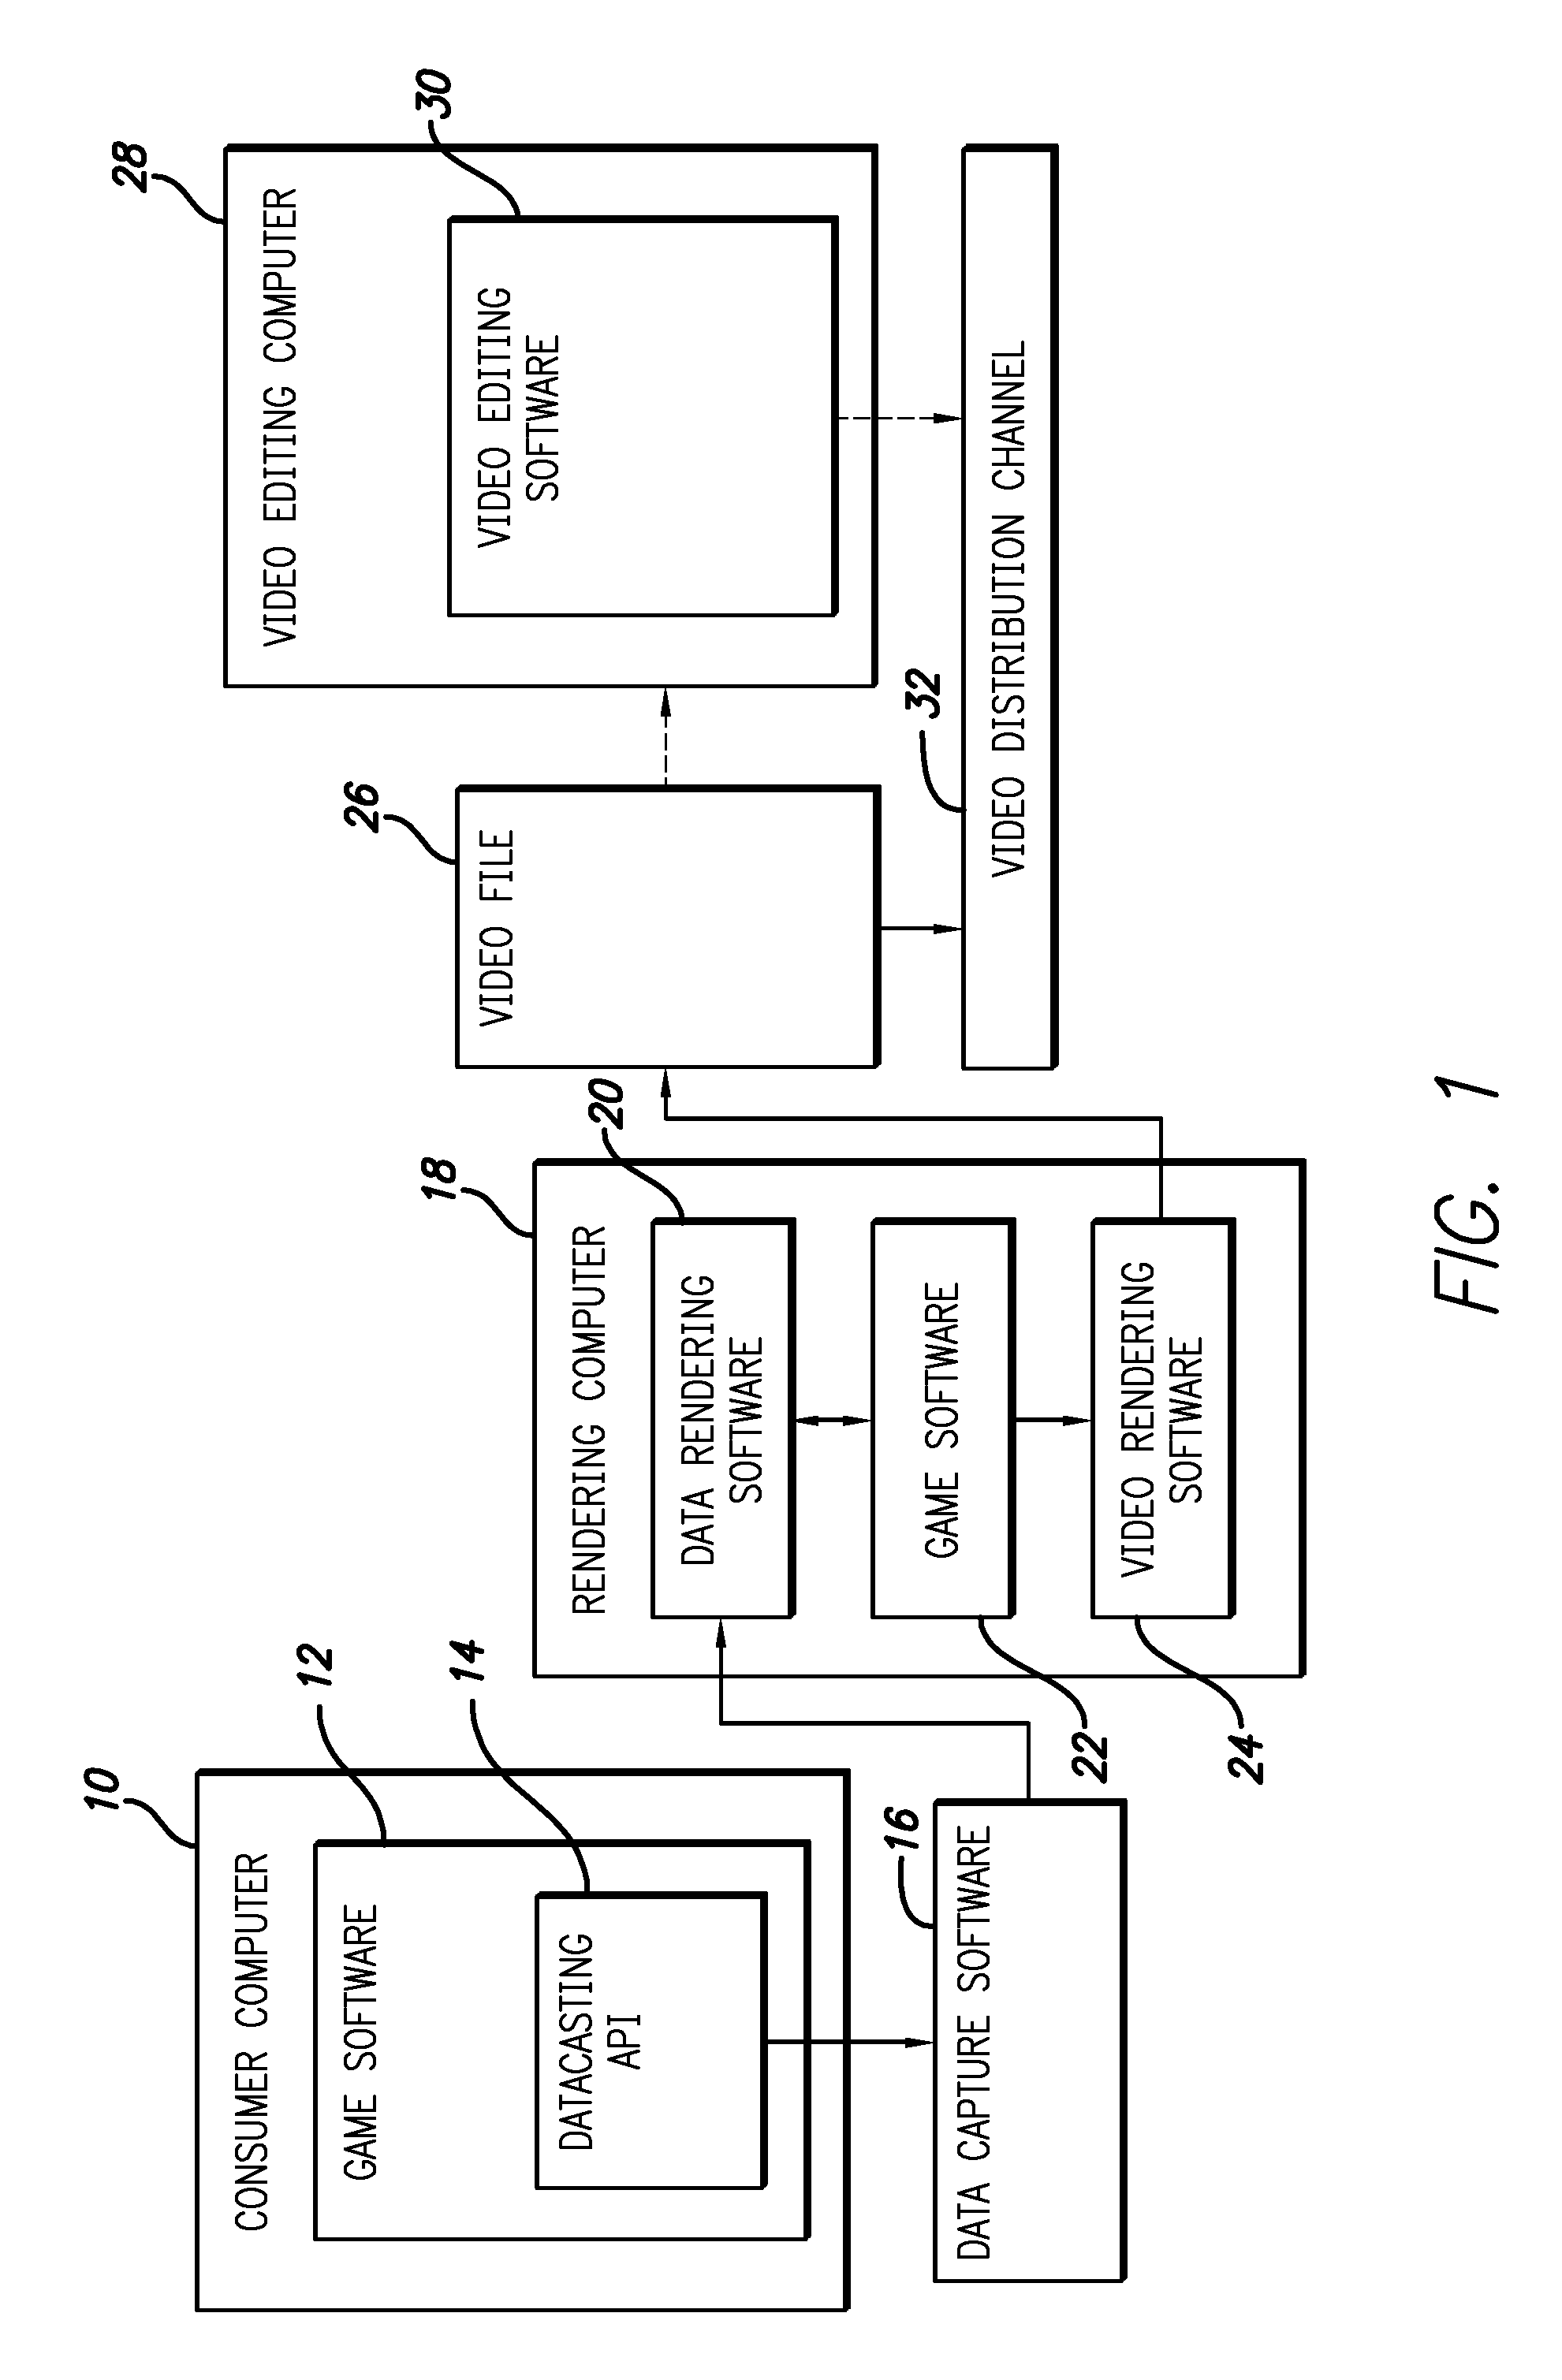 Method of creating video in a virtual world and method of distributing and using same